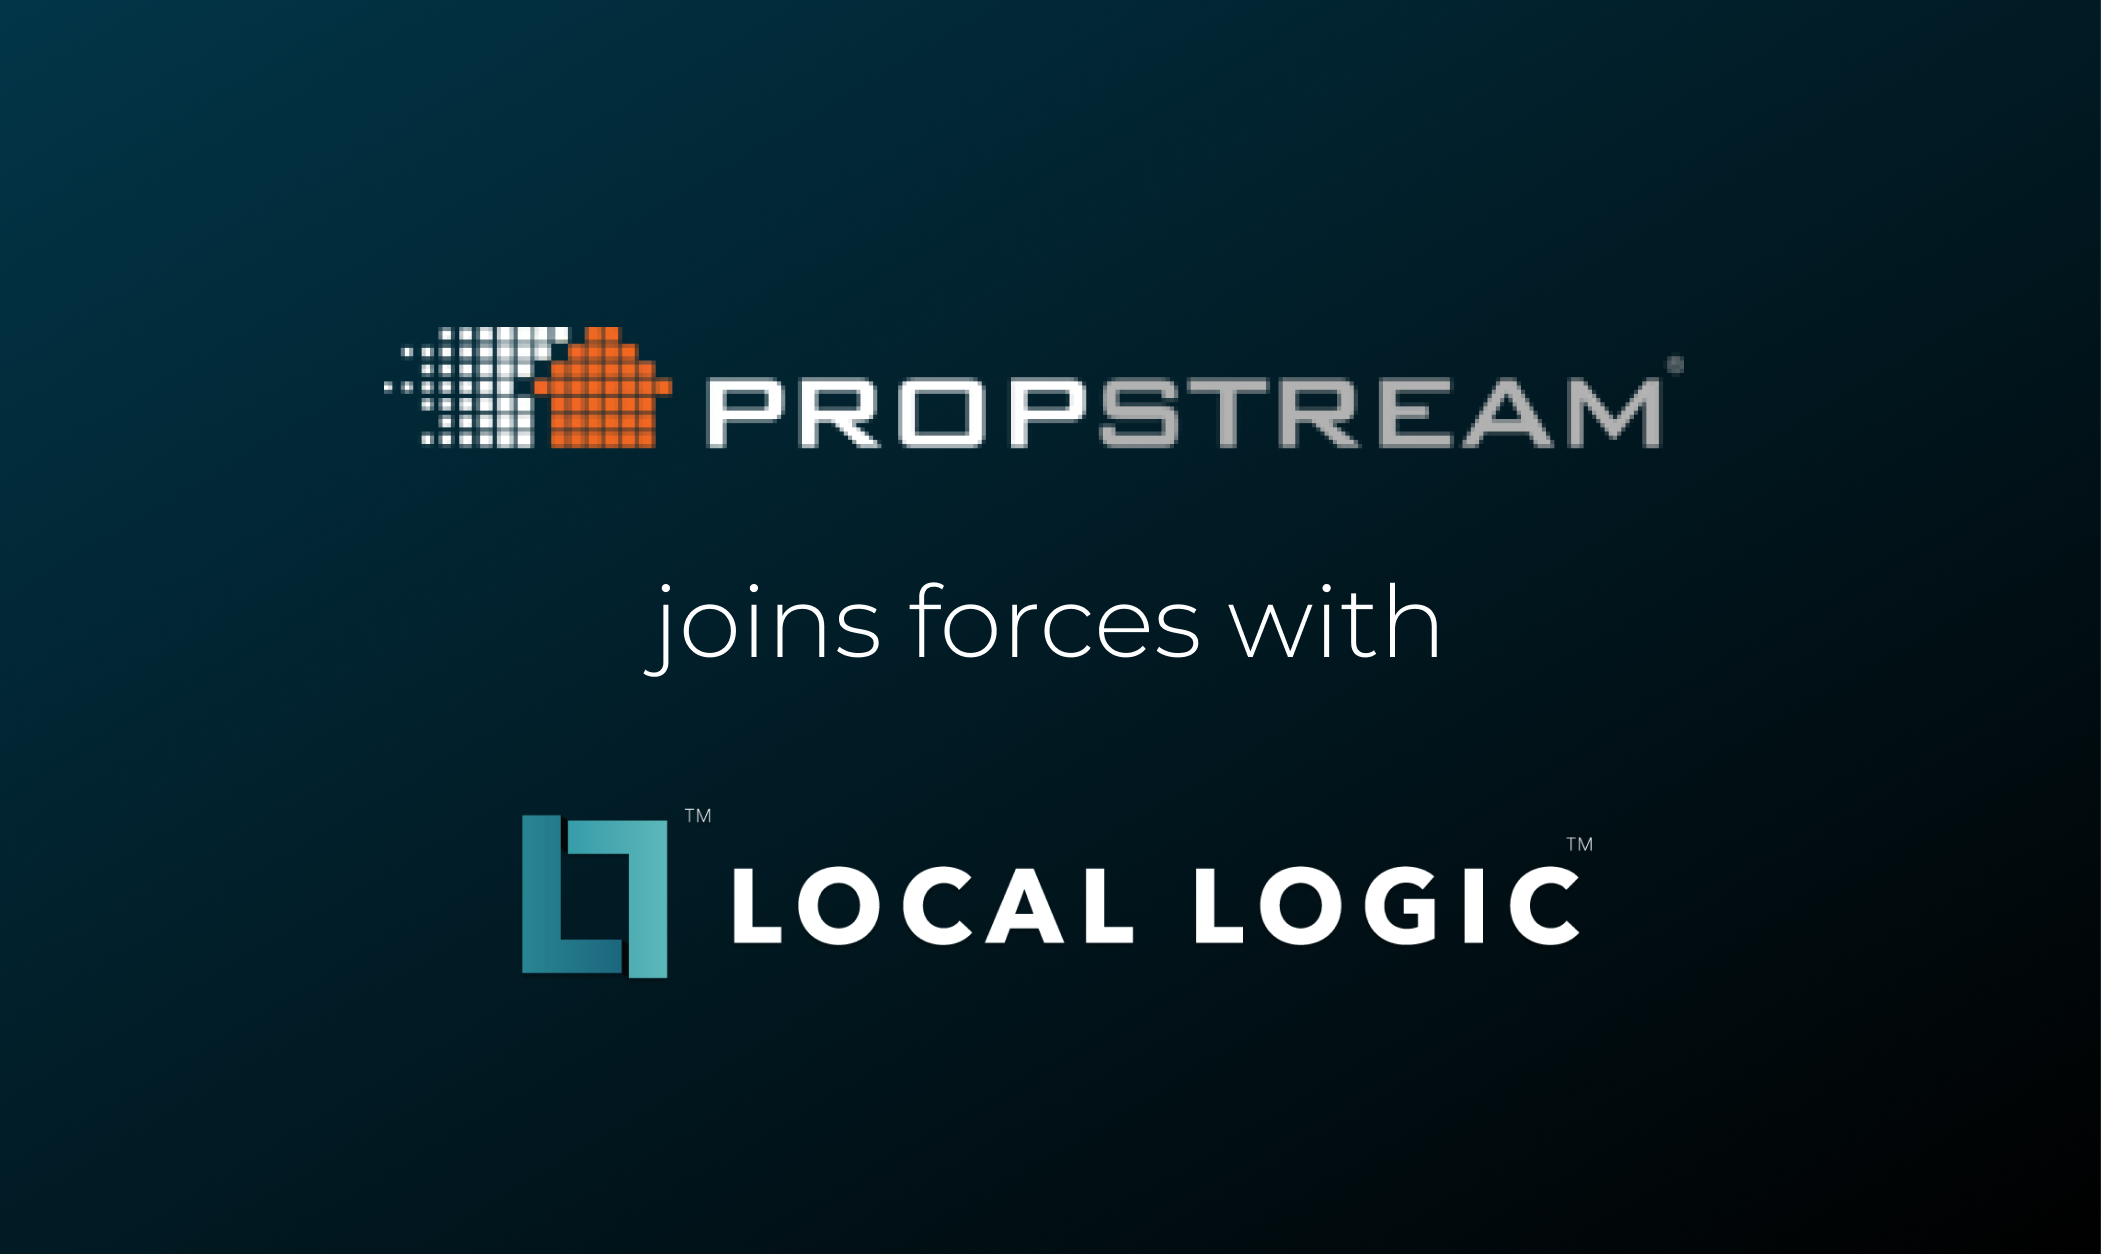 Logo of Propstream on top of text "joins force with" followed by Local Logic logo to announce new partnership between Propstream and Local Logic